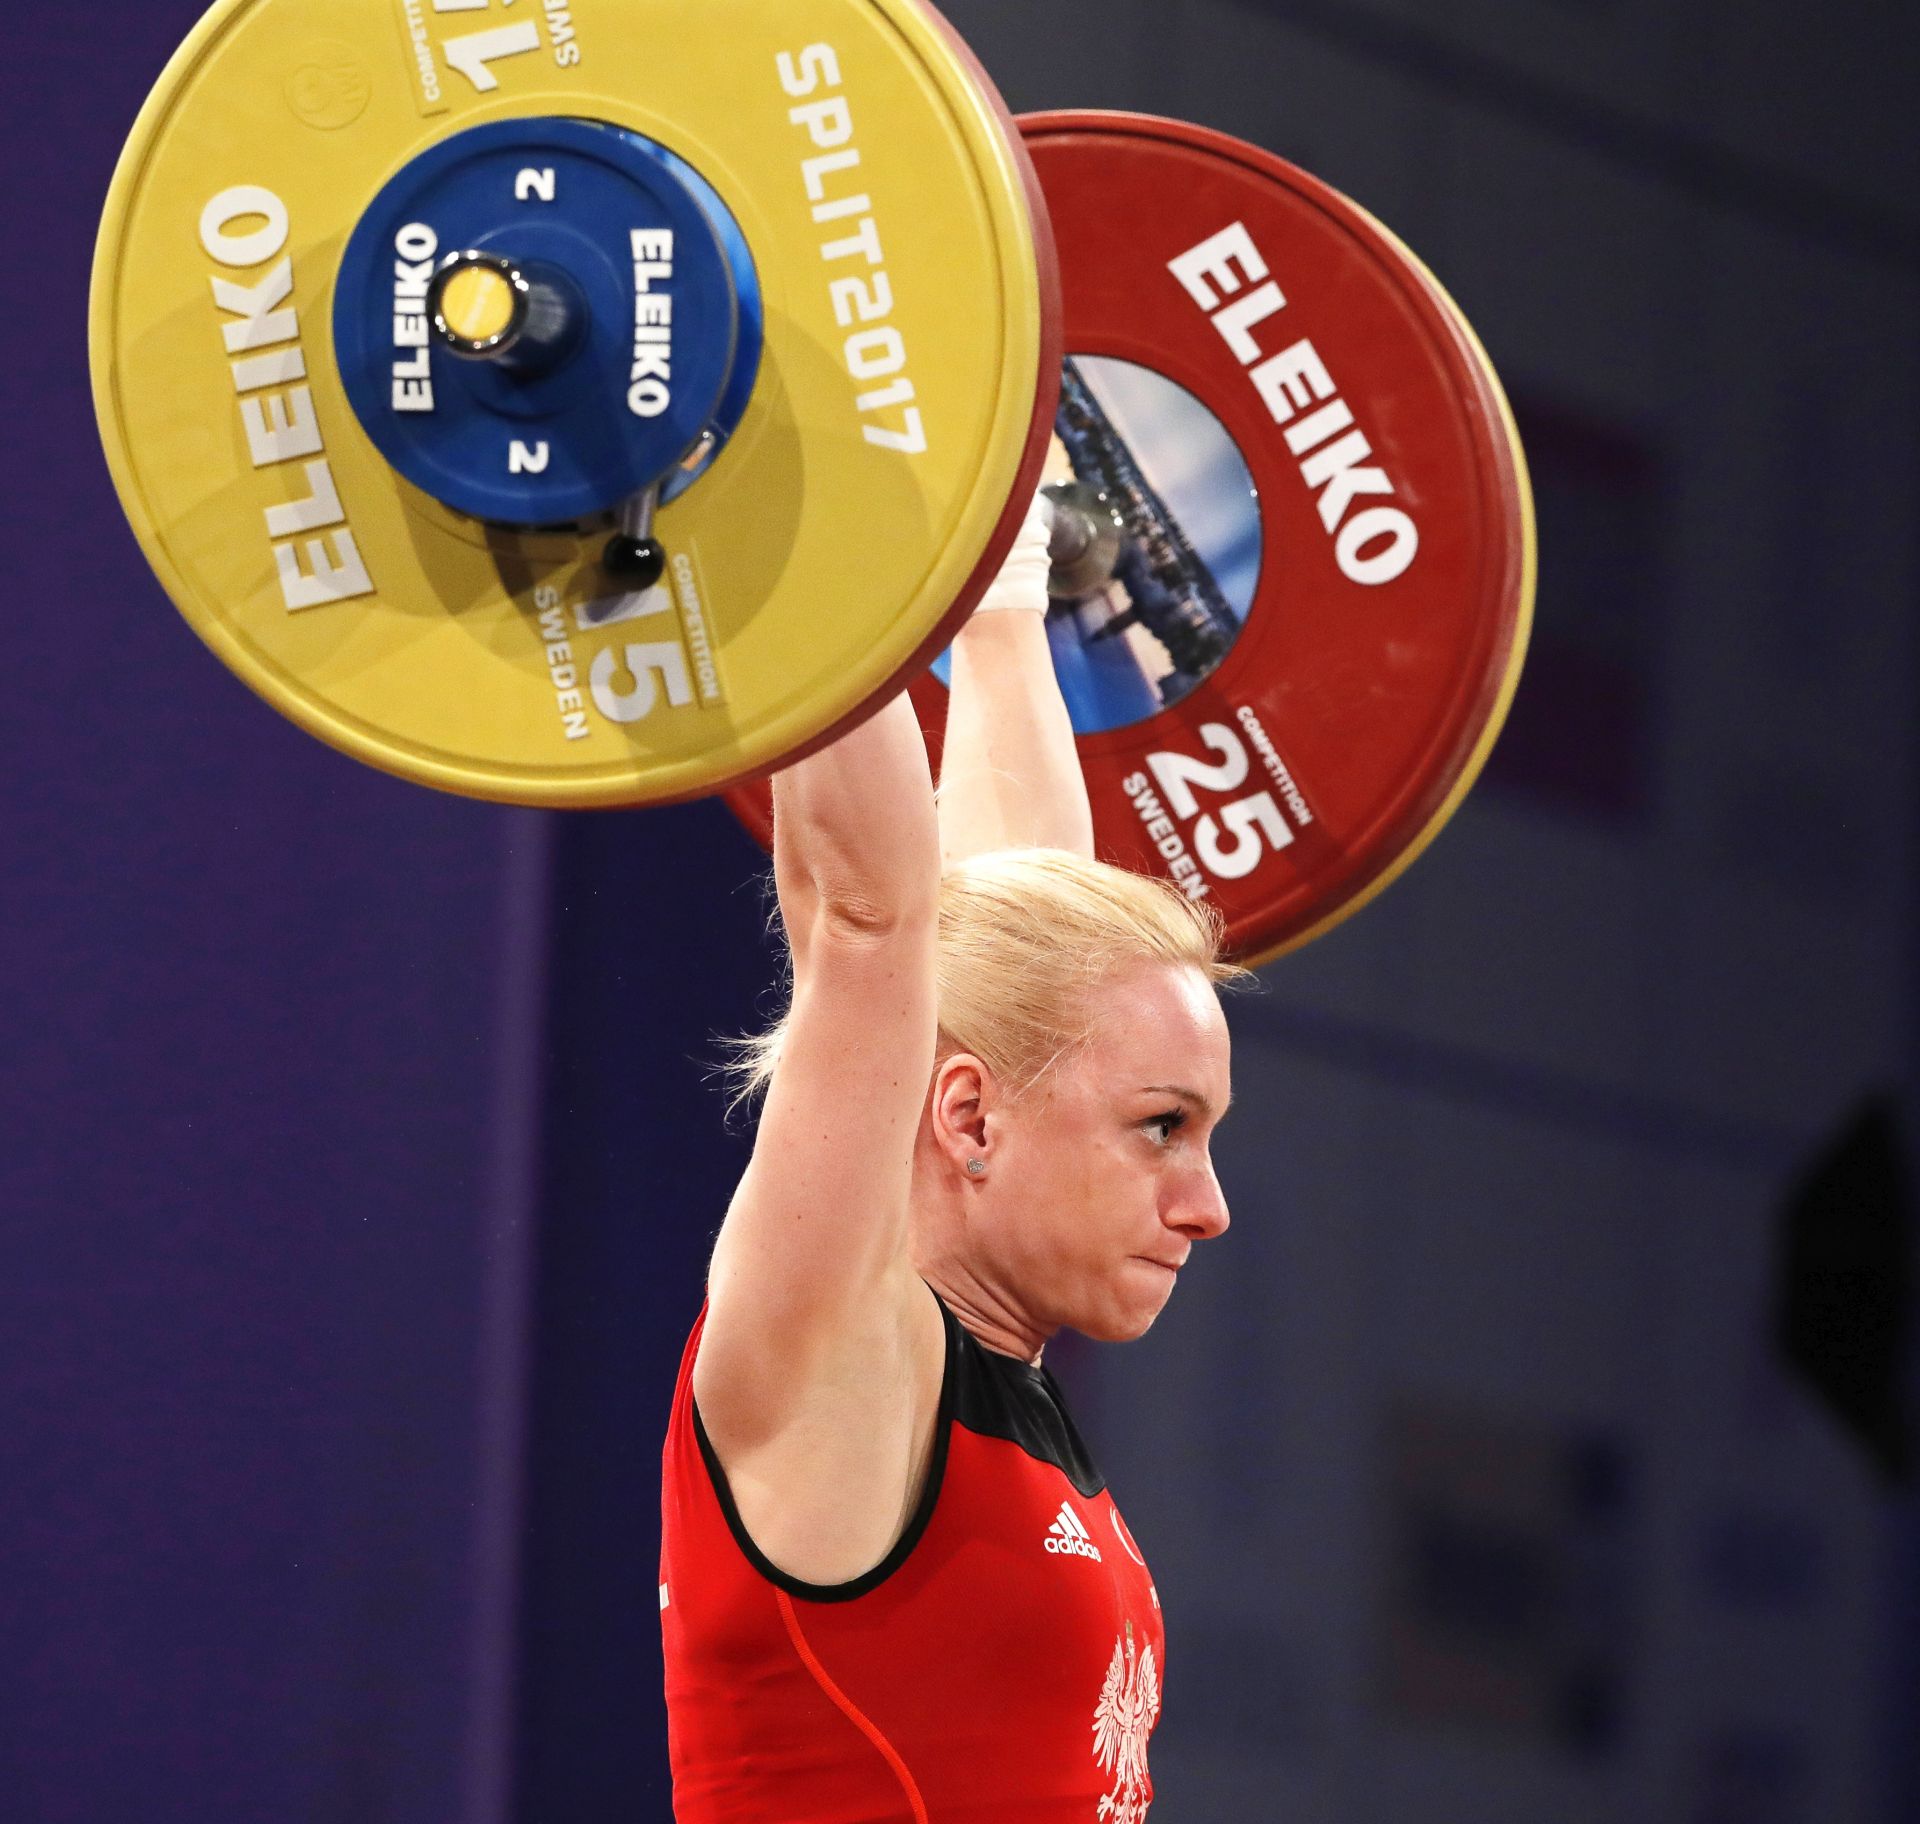 epa05886423 Joanna Lochowska of Poland makes an attempt during the women's 53kg category of the Weightlifting European Championships 2017 in Split, Croatia, 03 April 2017. Lochowska won the gold medal.  EPA/ANTONIO BAT